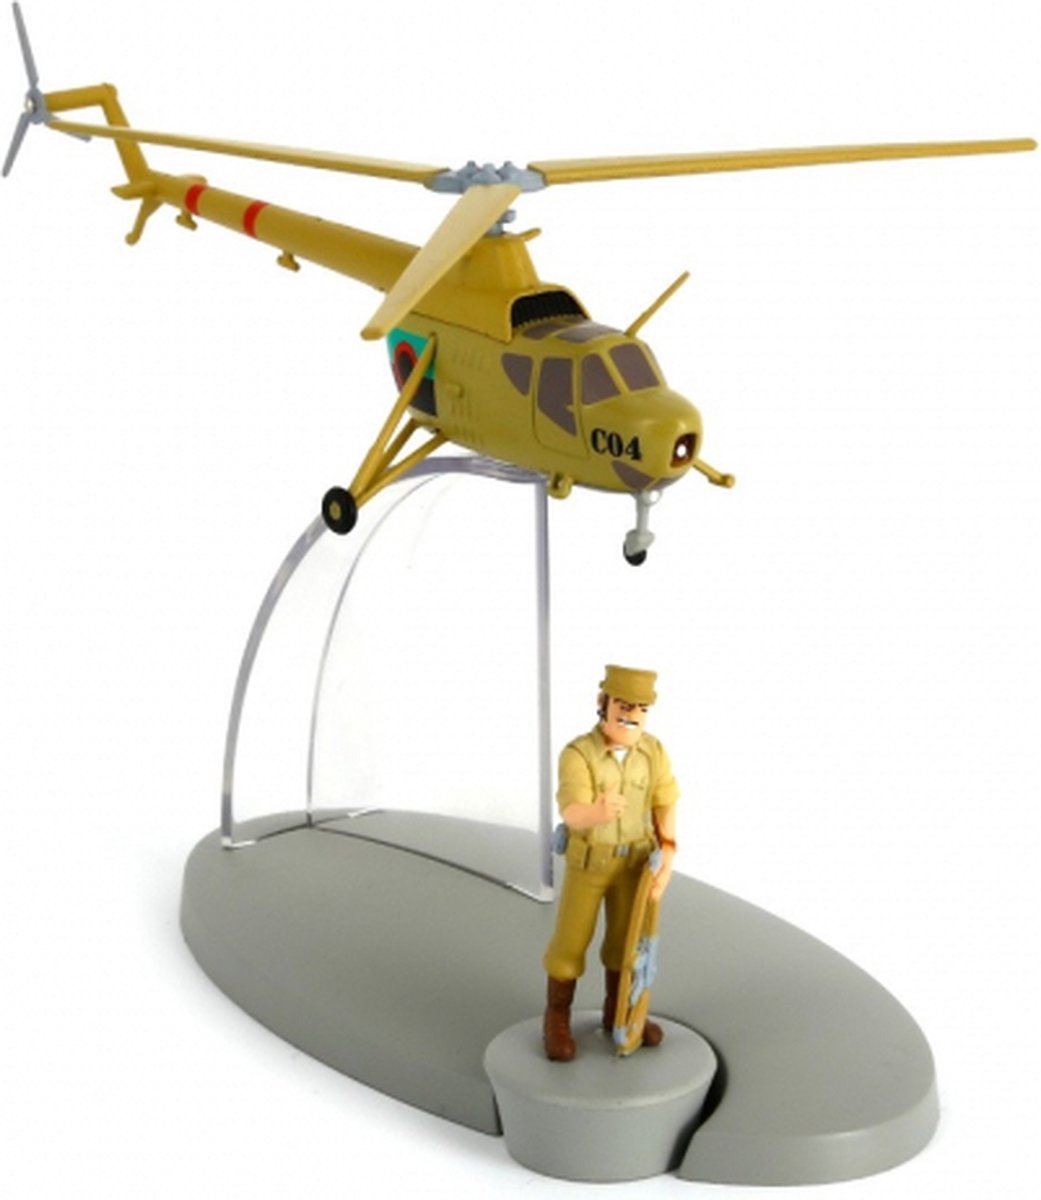 Tintin - Figure - Airplane Collection - Tintin helicopter C 04 of the army of San Theodoros #22 - aeroplane, Airplane, helicopter, Kuifje, moulinsart, soviets, Tintin, Tintin Soviets - Gadgetz Home